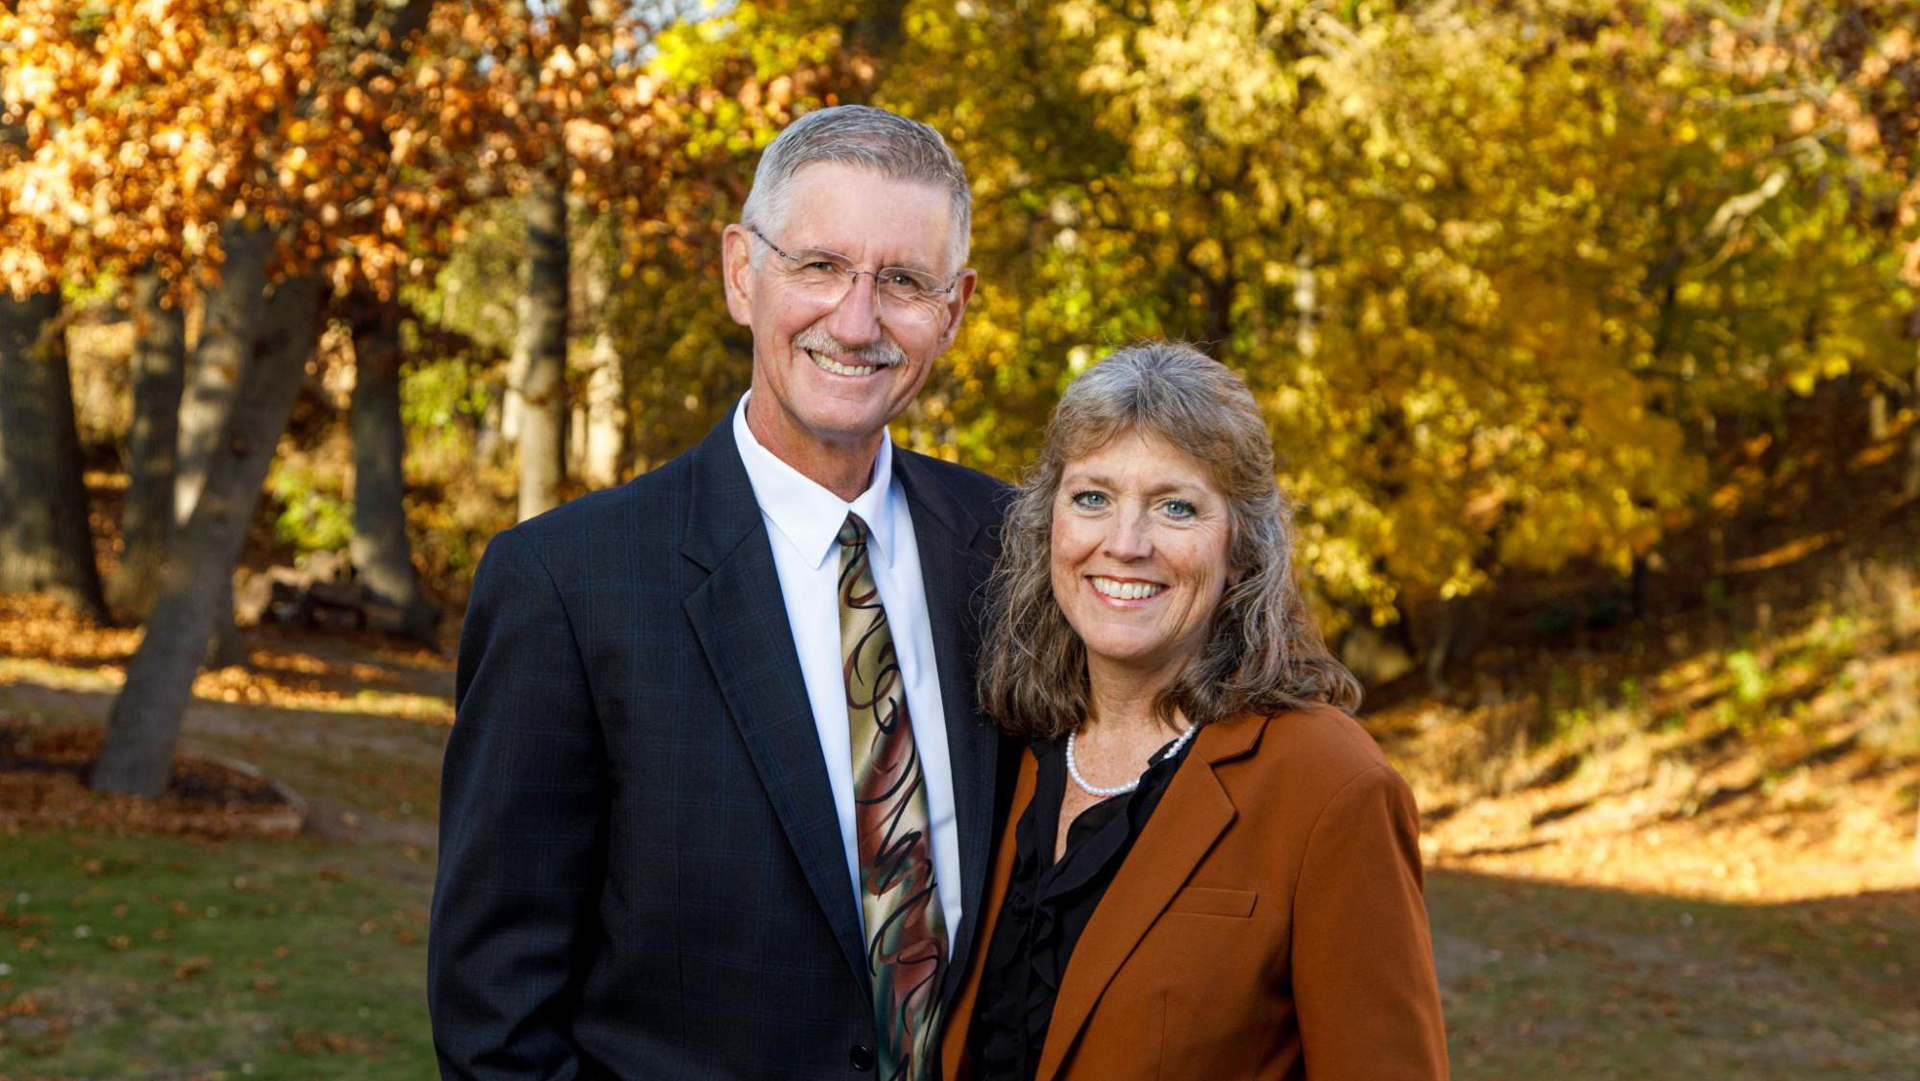 President Ken and Kathy Kemper on the grounds of Grace Christian University in fall.